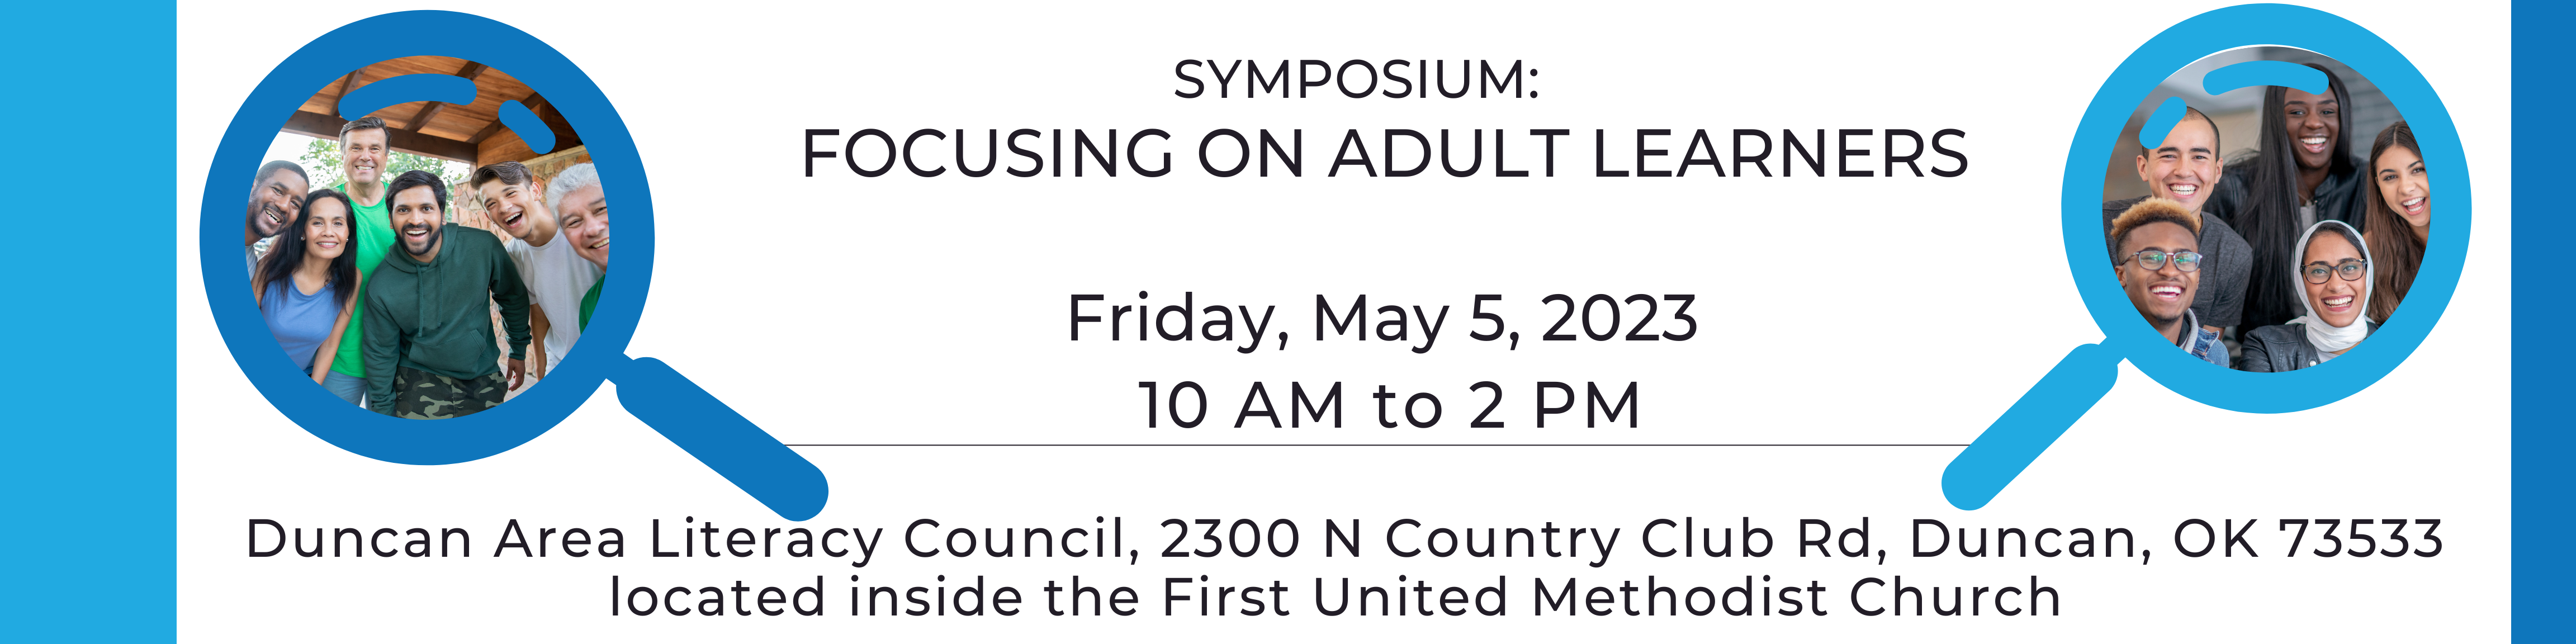 The May Symposium: Focusing on Adult Learners will be on May 5 from 10 PM to 2 PM inside the Duncan First United Methodist Church. The church is located at 2300 N Country Club Drive Rd, Duncan, OK 73533.